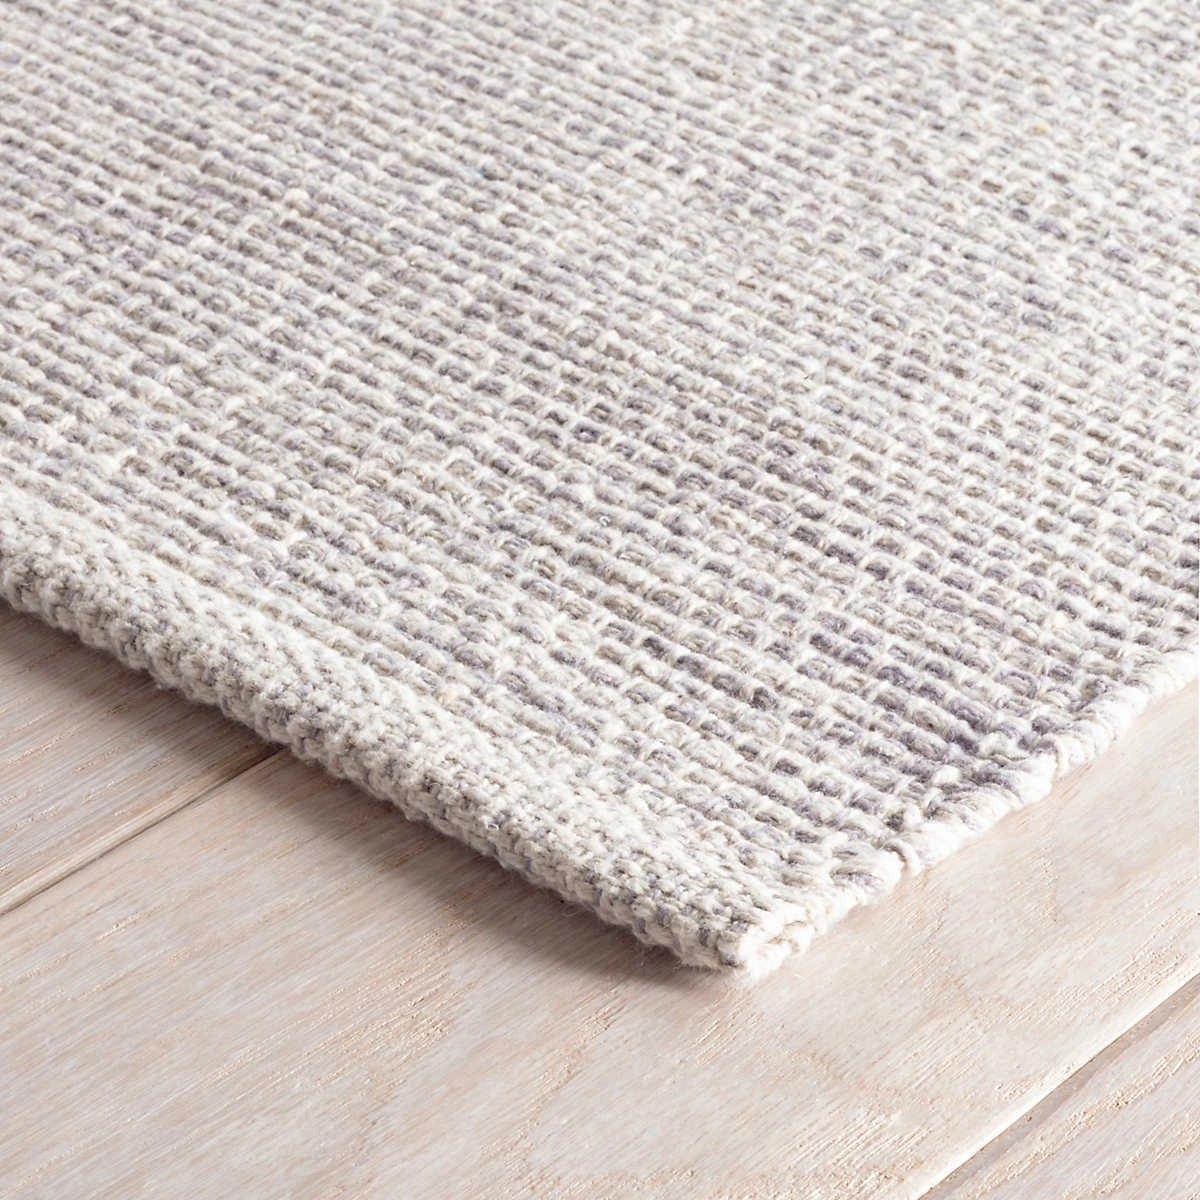 MARLED GREY WOVEN COTTON RUG - 6x9 - Image 1